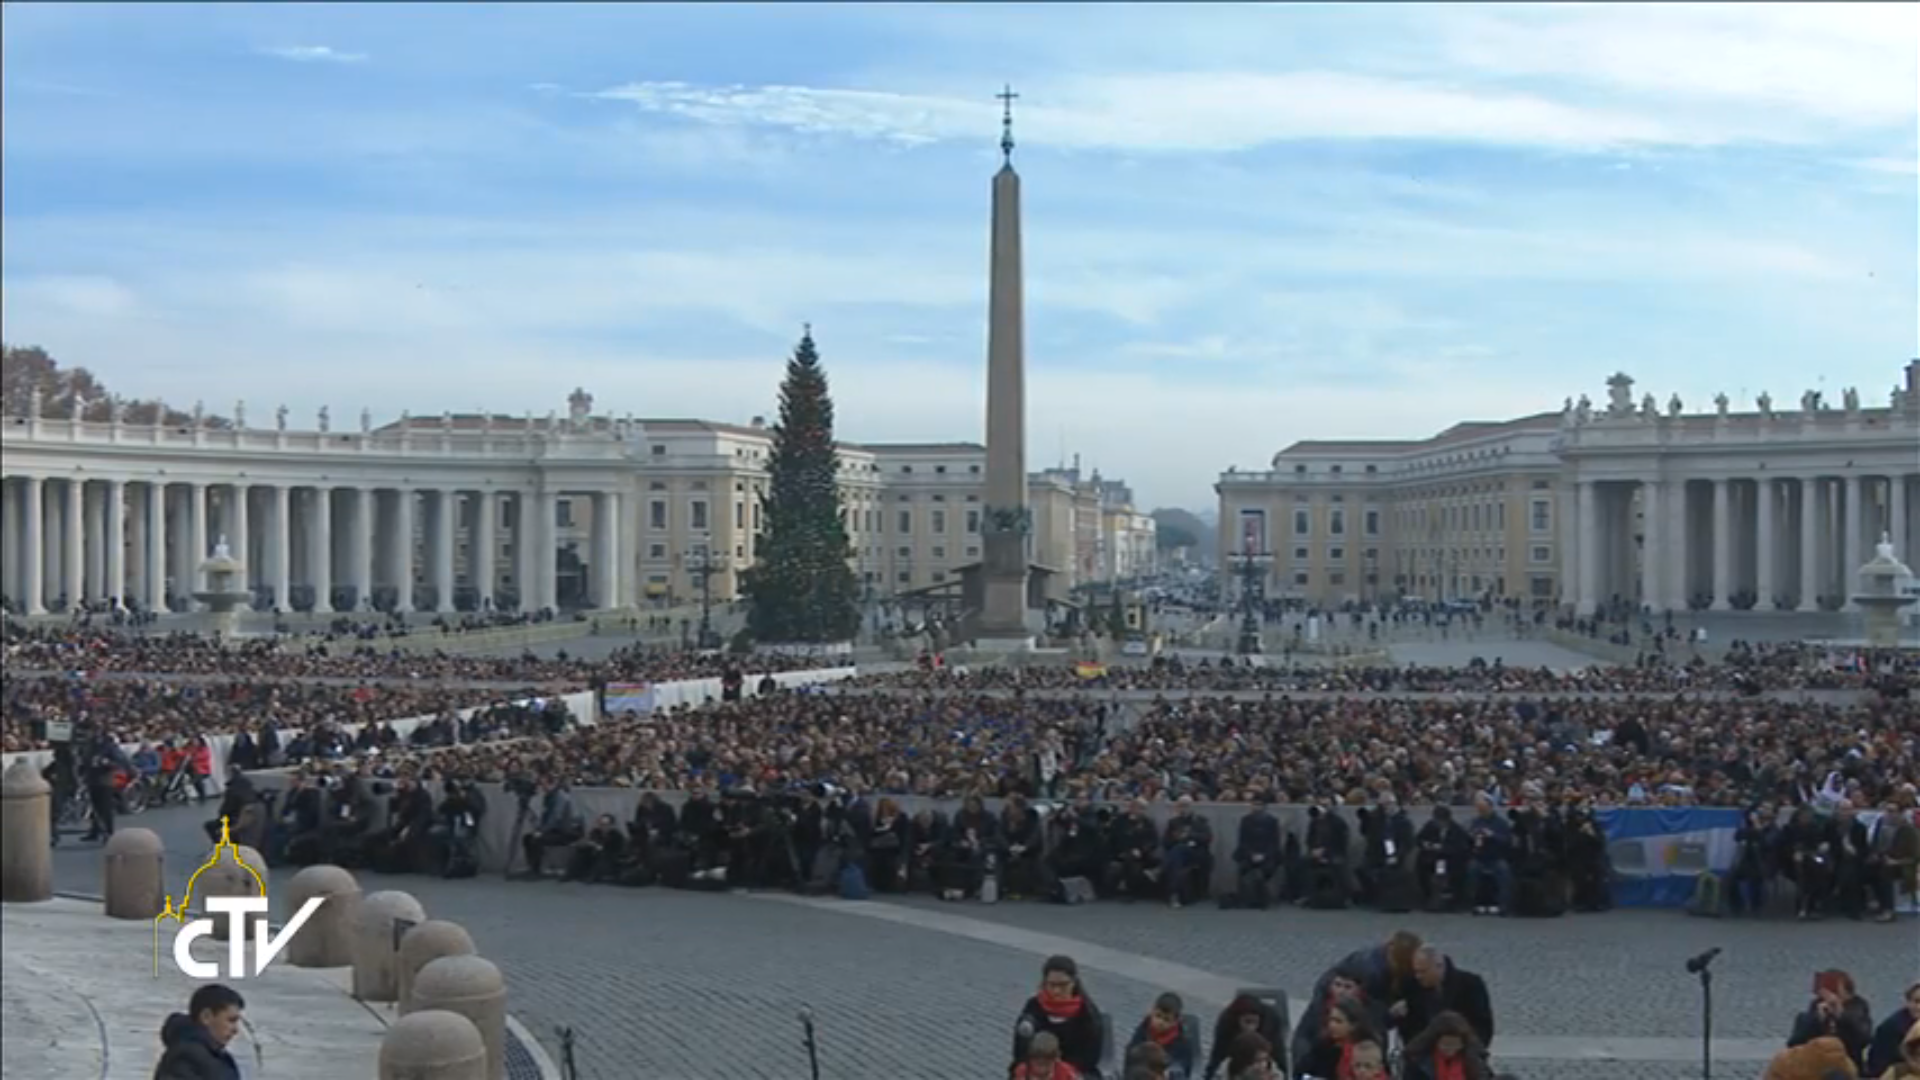 General audience Decembre 16th 2015 St Peter's Square